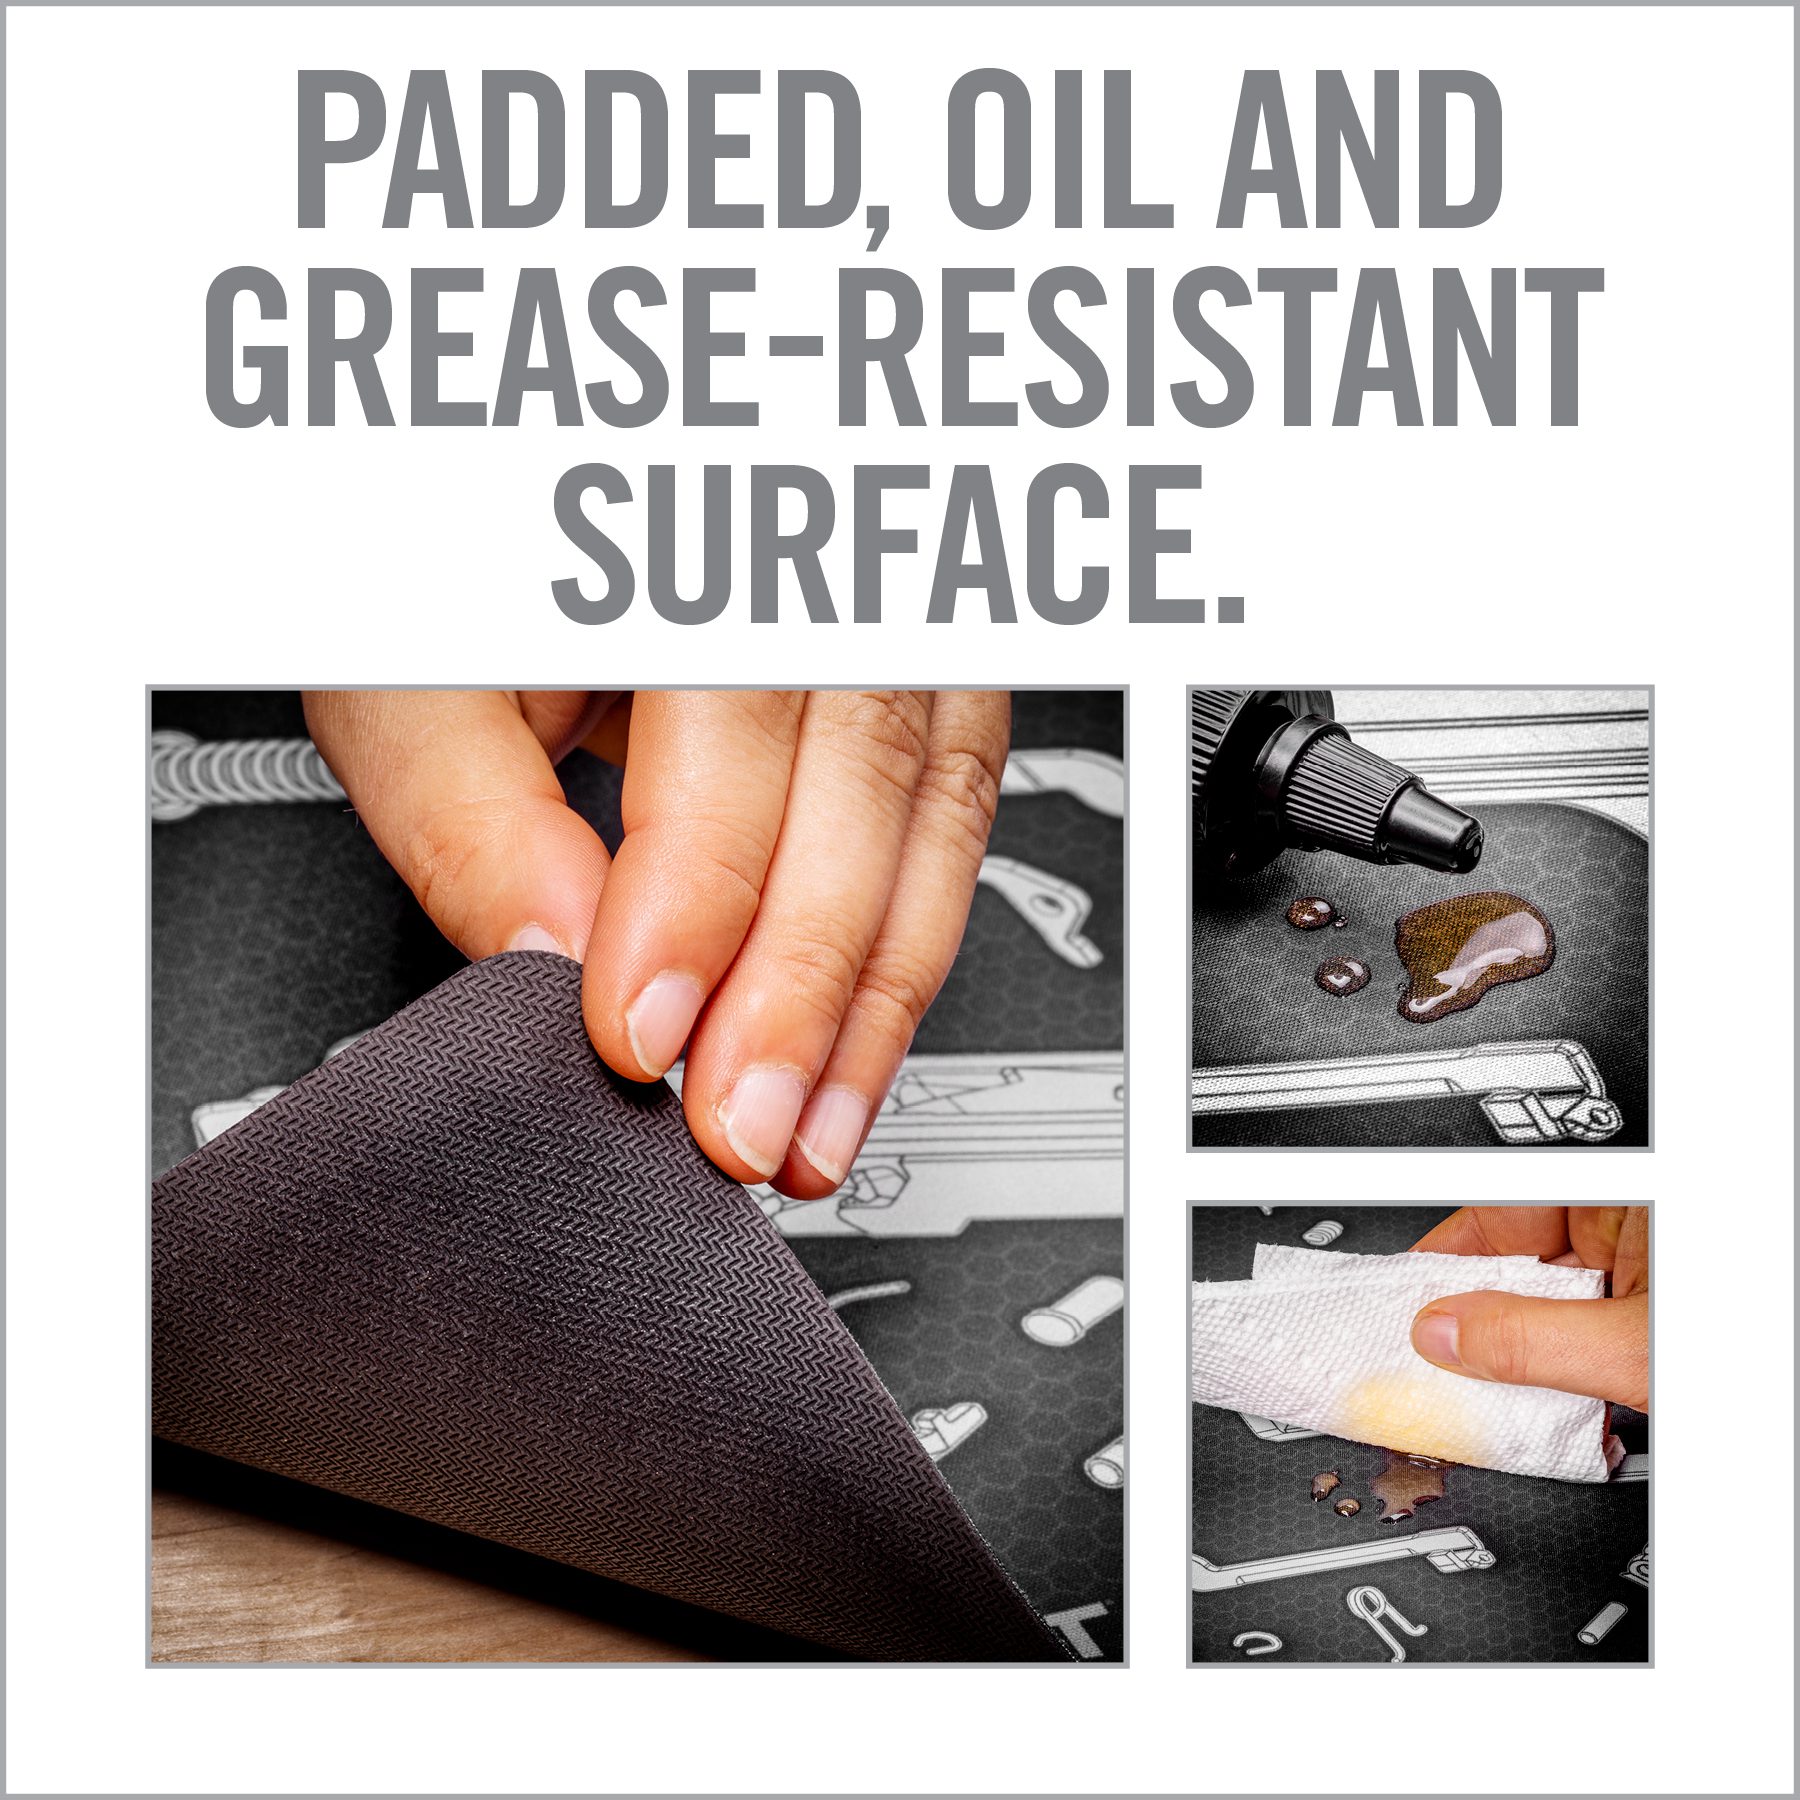 a poster with instructions on how to use an oil and grease resistant surface